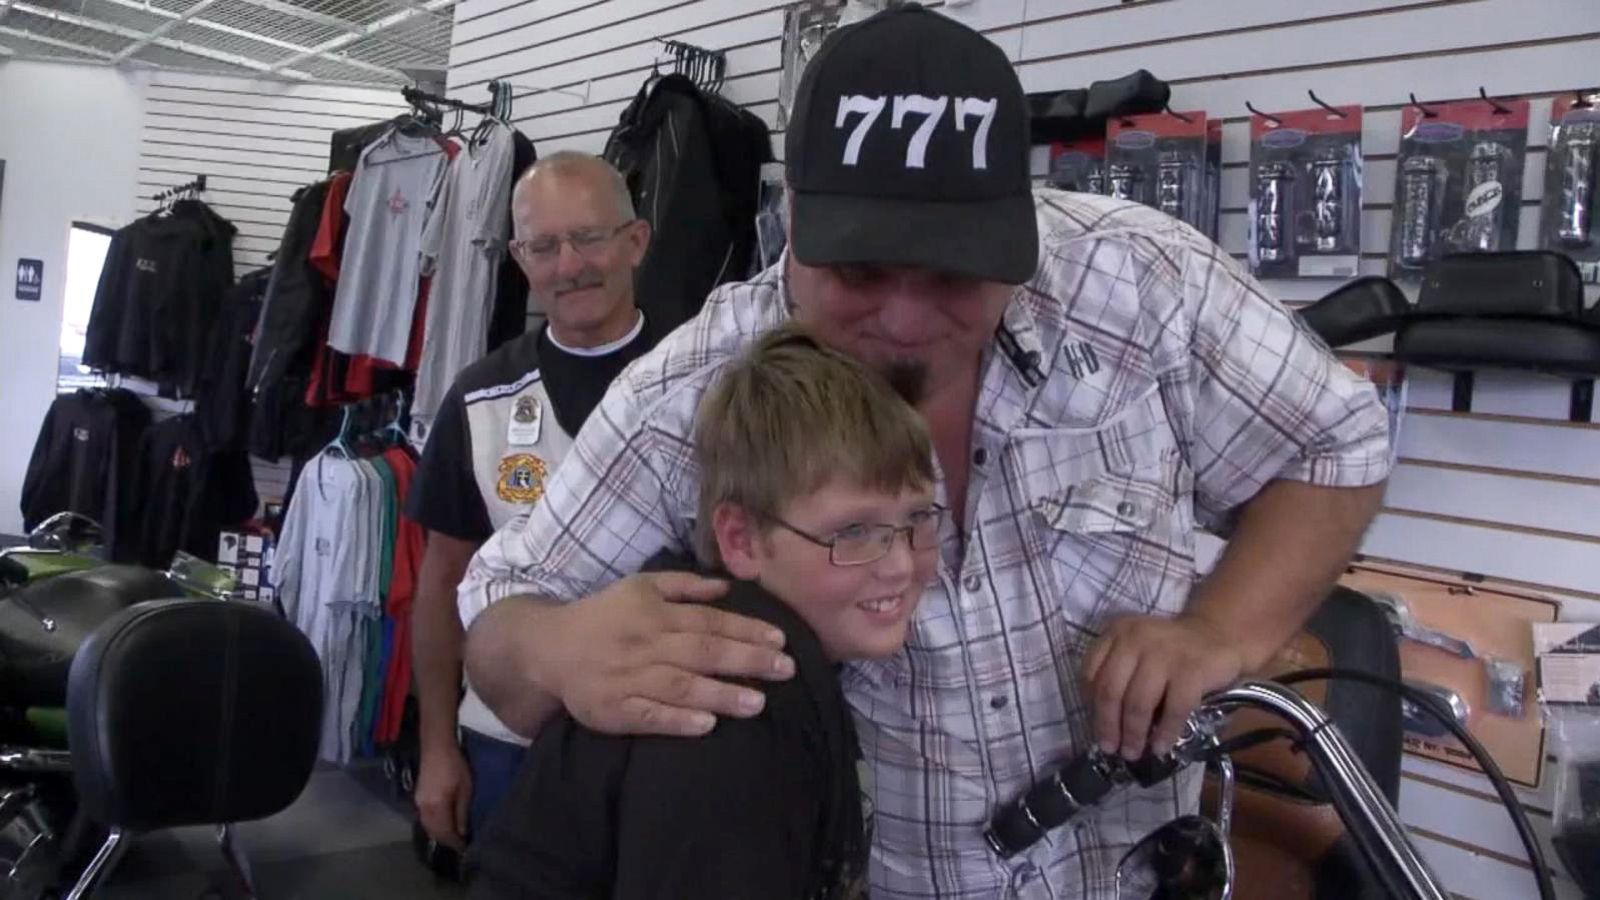 11 year old Phil Mick getting hug from man wearing 777 hat.